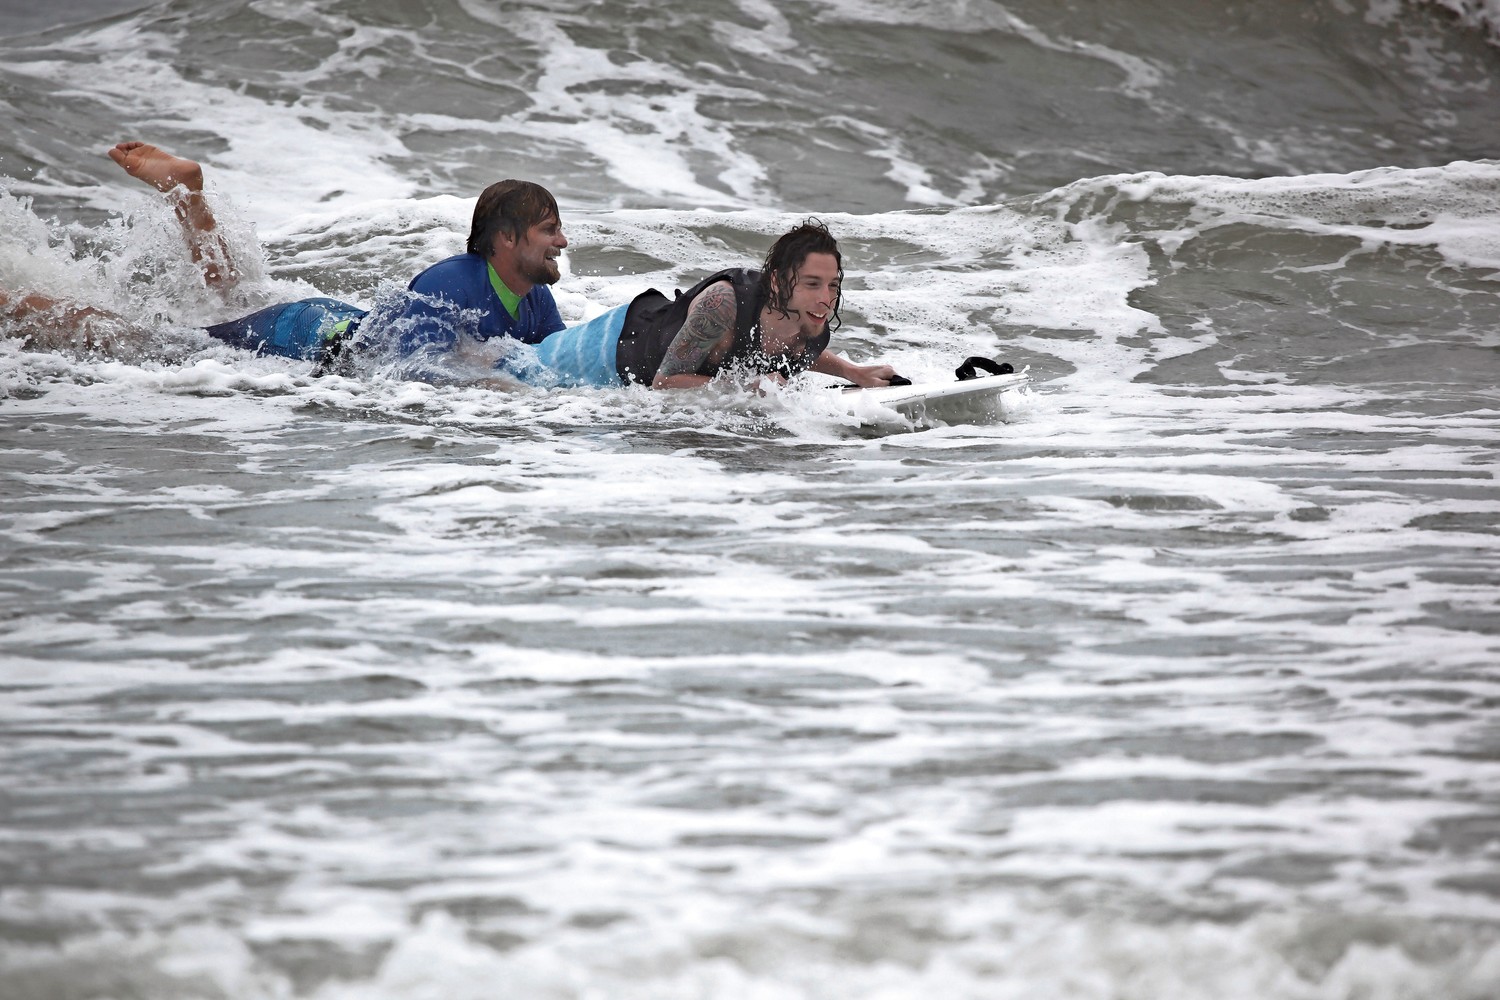 Will Skudin, left, hit the waves with "Surfing Samurai" Dylan Hronec in July during the 8th annual NYSEA Surf Week.